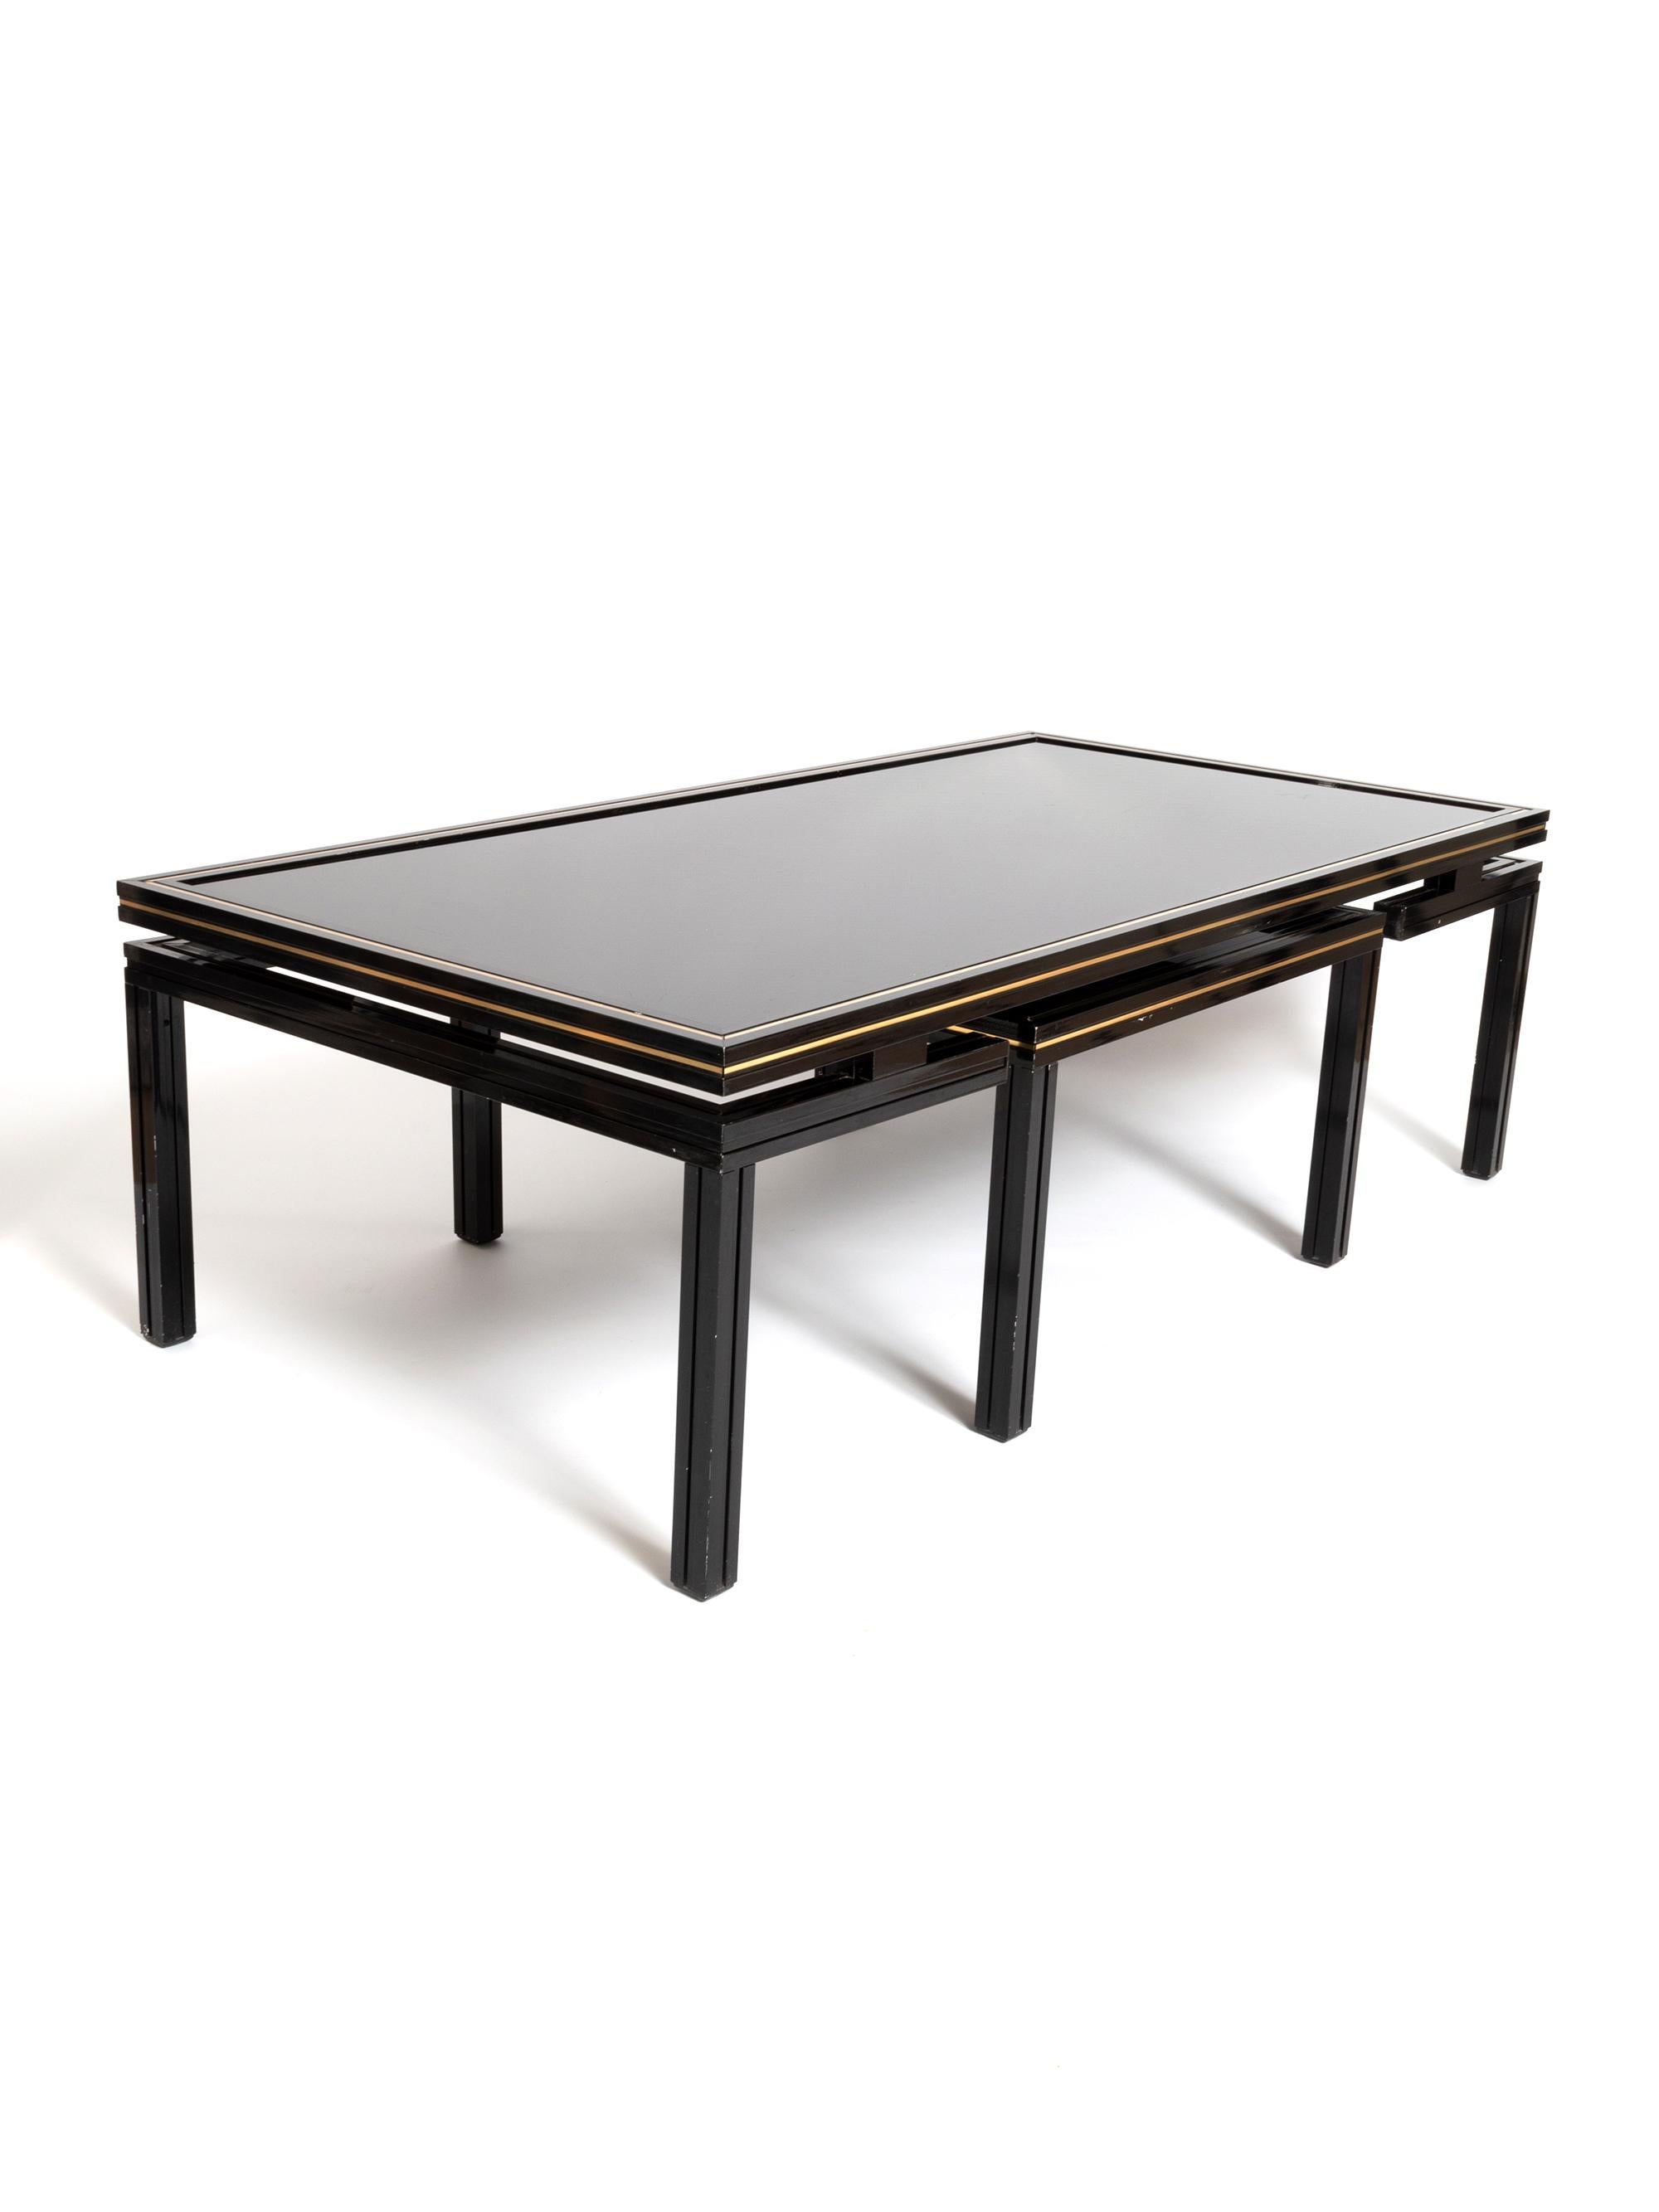 Pierre Vandel Paris black lacquer coffee table with nesting table. France, circa 1970.
In very good vintage condition with minor signs of wear.

Dimensions:
Coffee table
Length 105.5cm
Depth 54.5cm
Height 33cm

Nesting table
Length